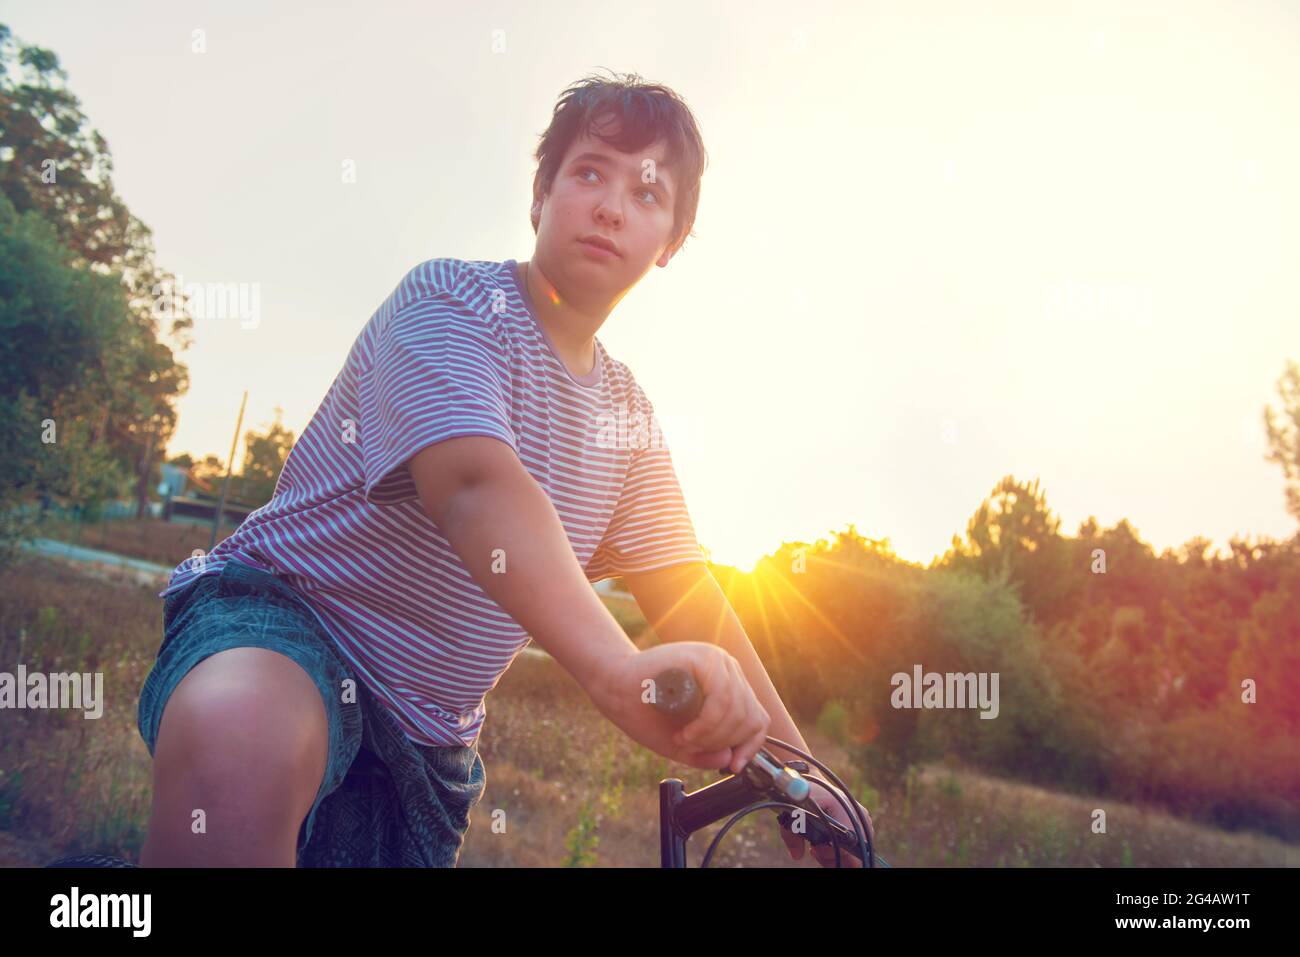 Happy boy posing in a bicycle outdoors at sunset Stock Photo